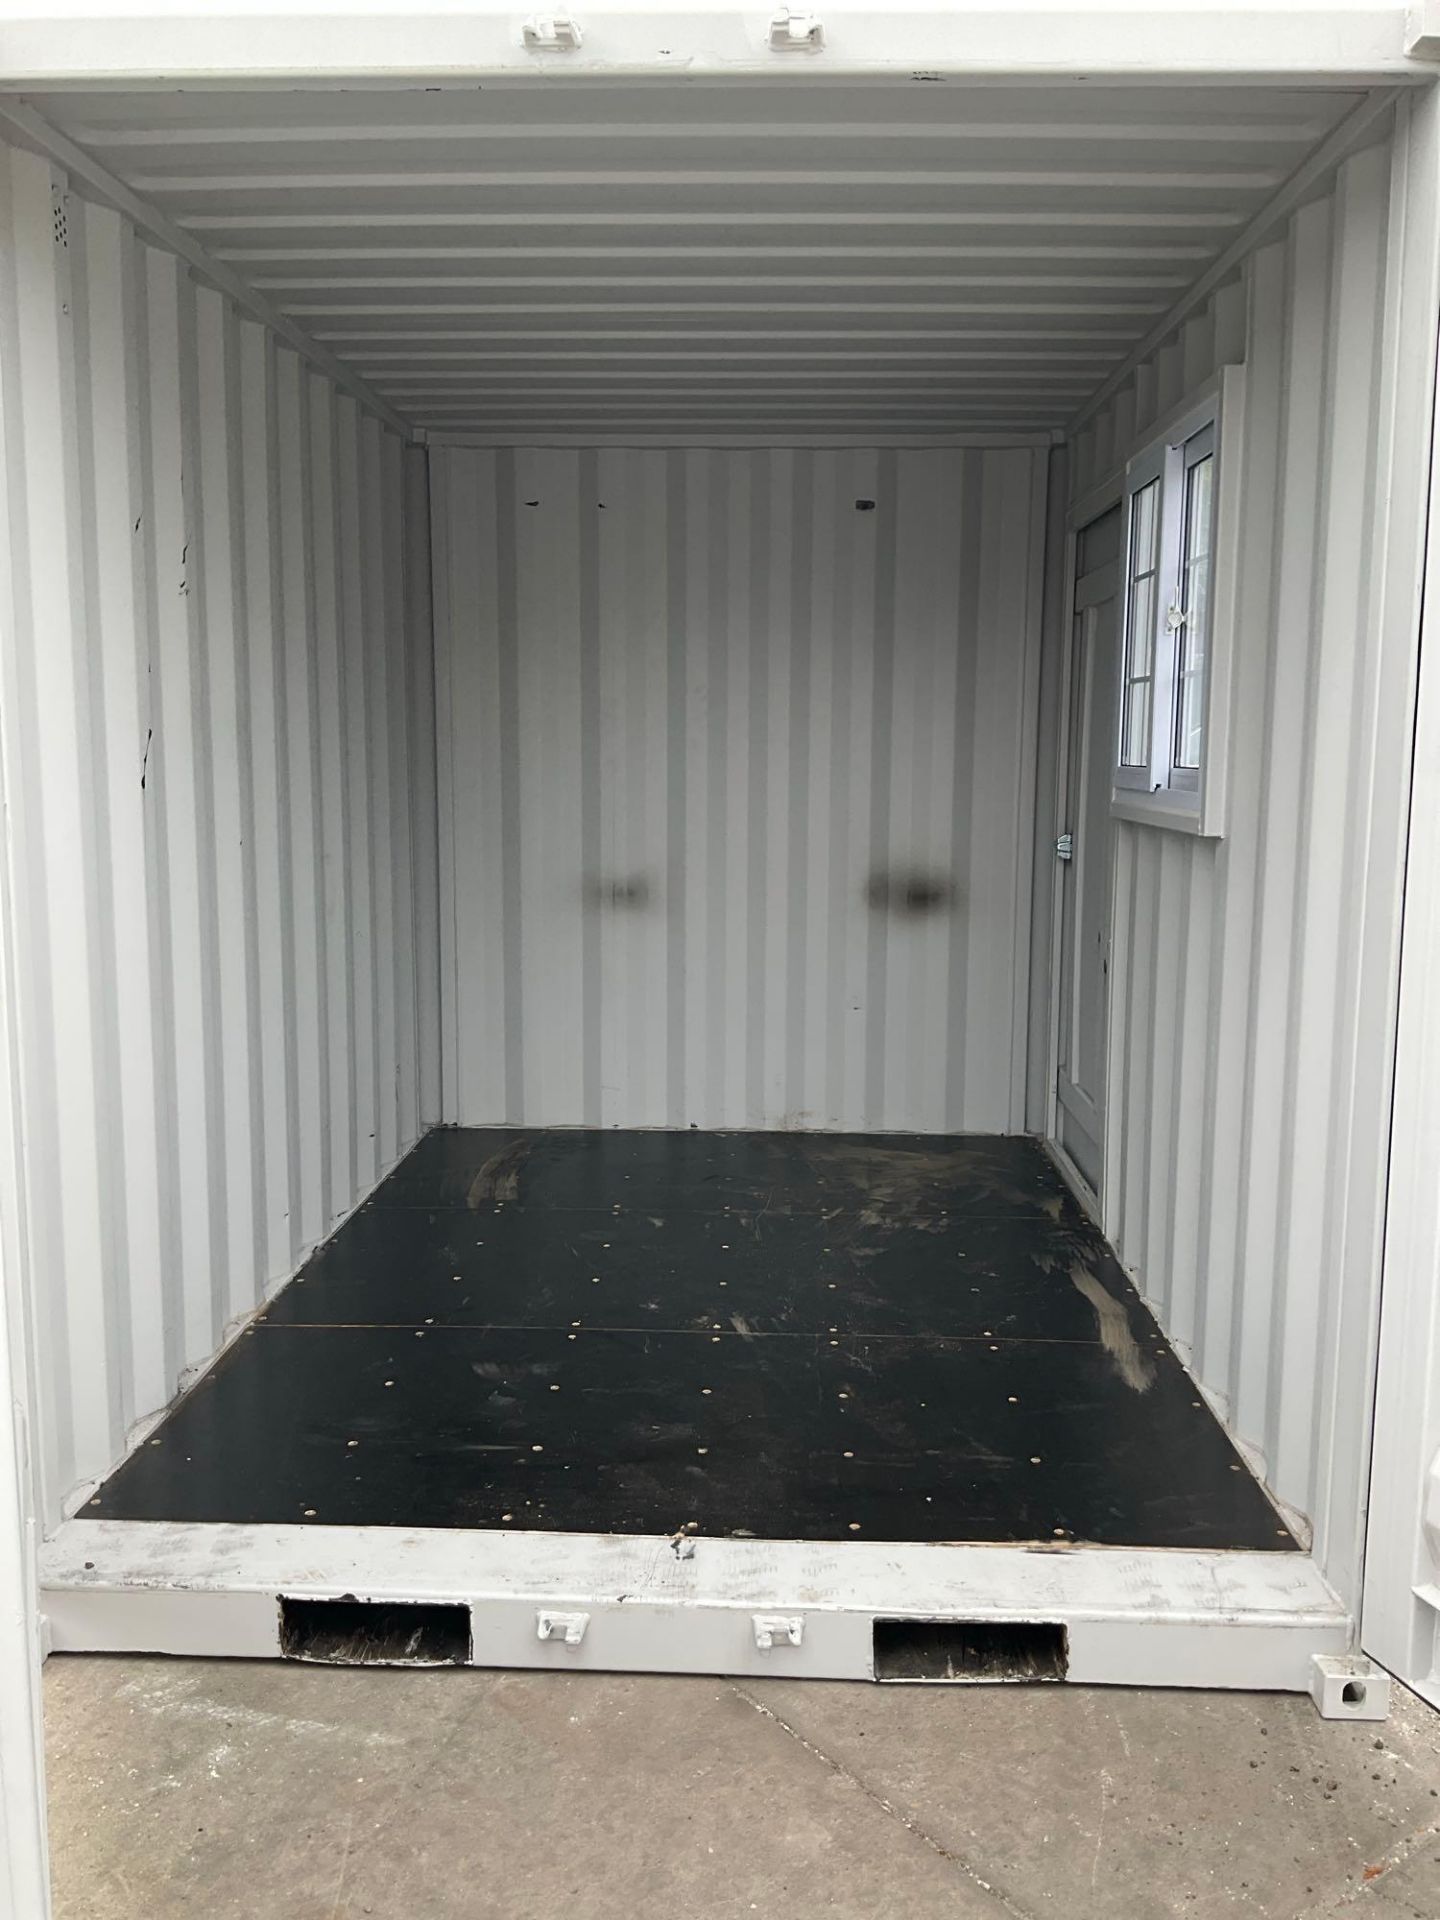 10' OFFICE / STORAGE CONTAINER, FORK POCKETS WITH SIDE DOOR ENTRANCE & SIDE WINDOW, APPROX 88€ W x - Image 8 of 9